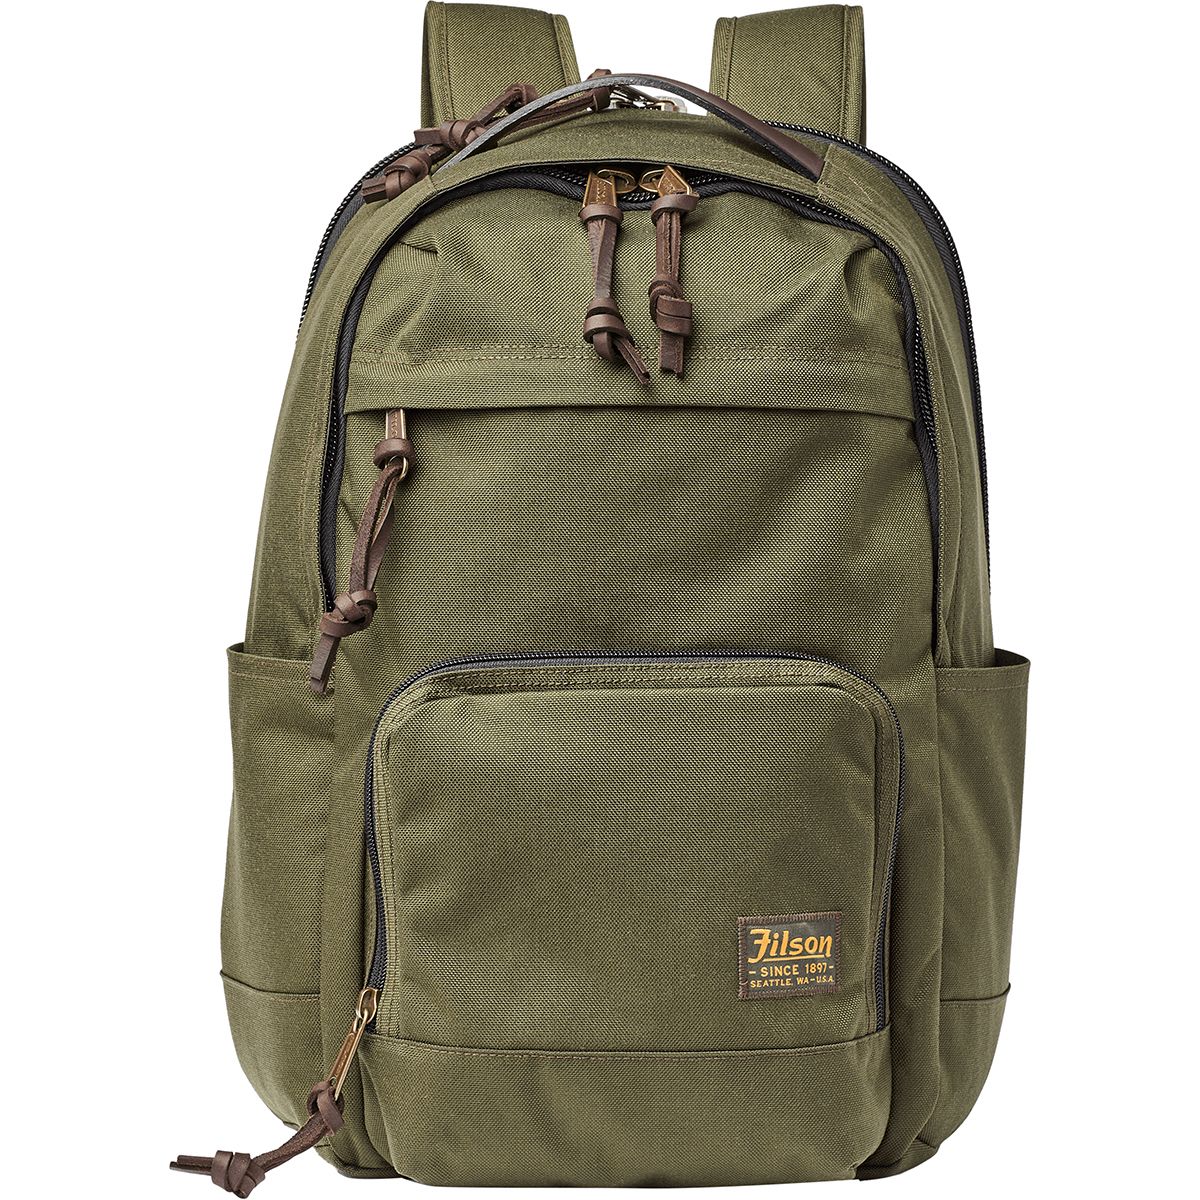 Filson Dryden 25.5L Backpack$265.00Color:Otter GreenOtter GreenSize:One SizeOne SizeAdd to Cart$2... | Backcountry